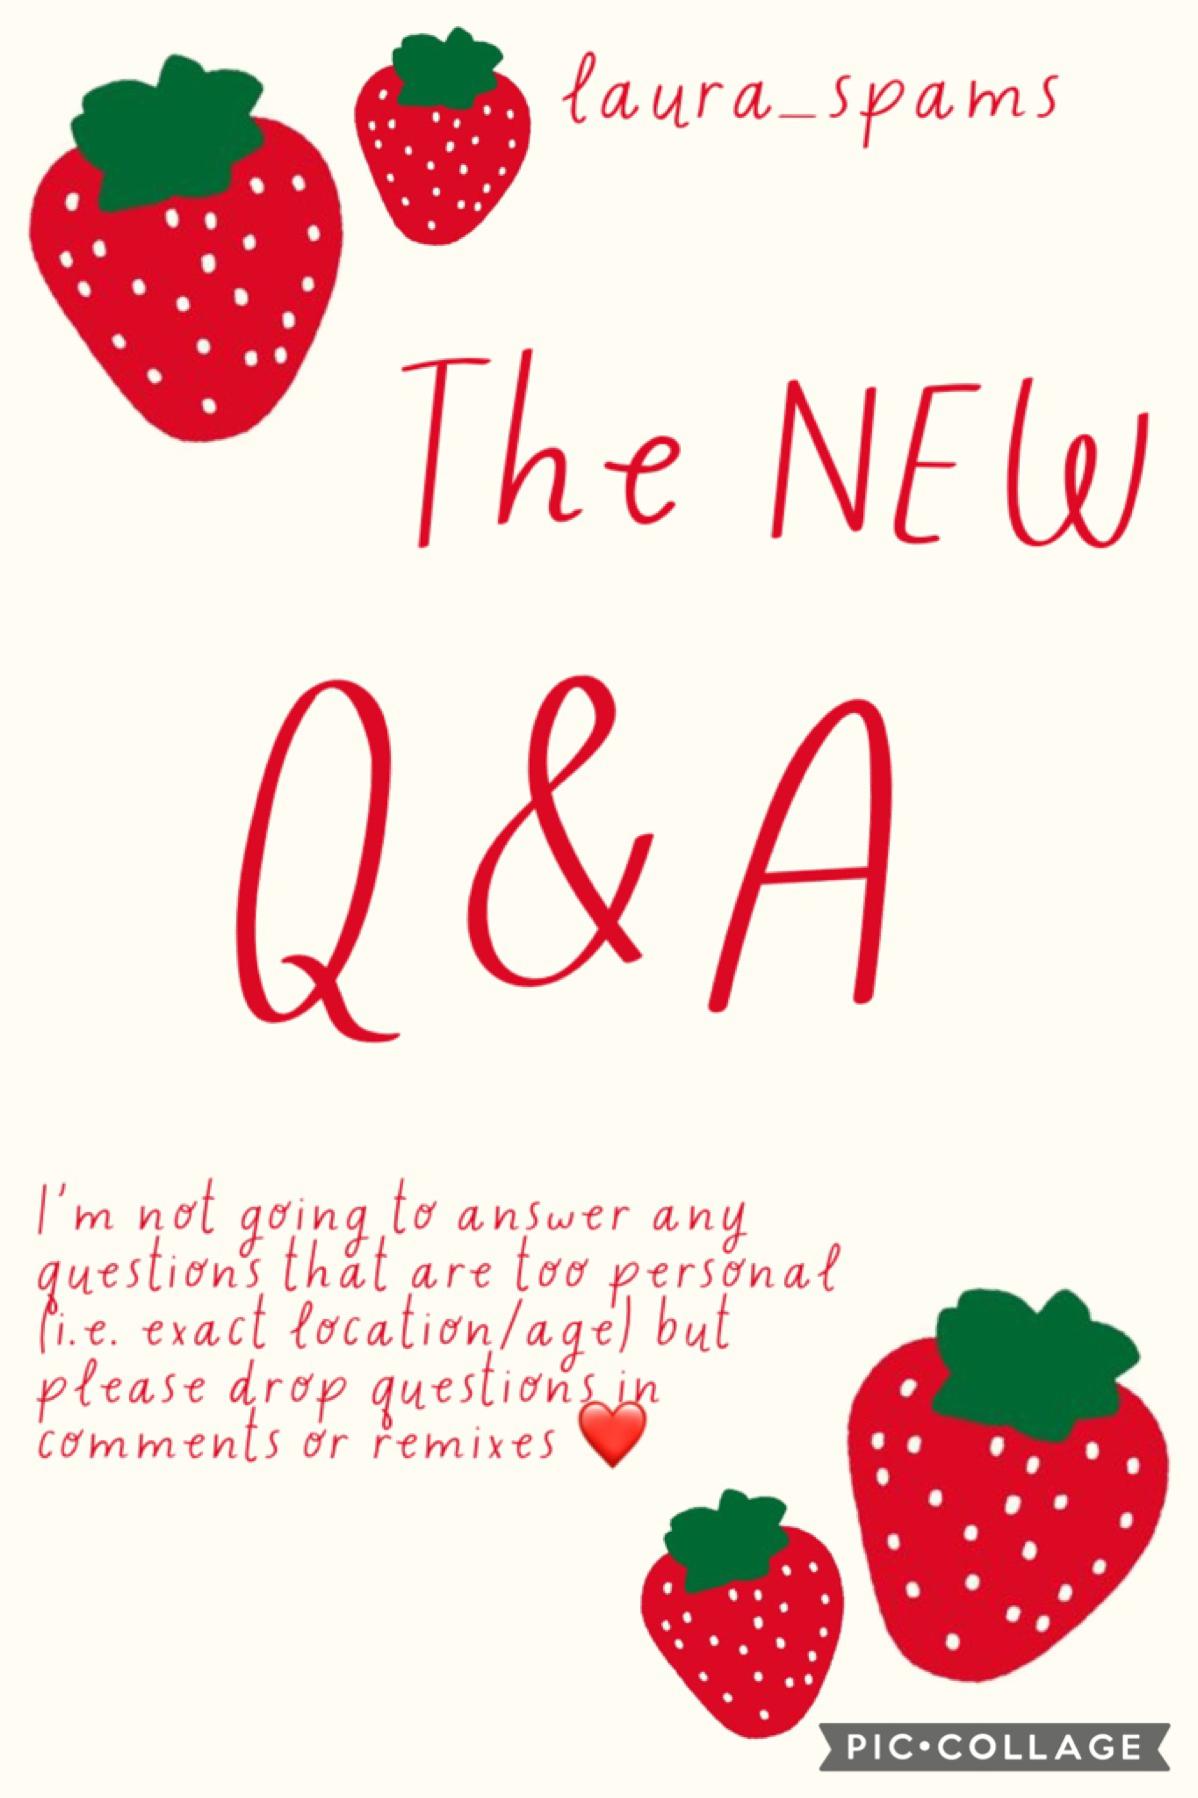 🍓💕🌿 my old Q&A on my other extras was left unanswered (shameful ik 🙈) but there’s always another chance :) I’ll leave this up for a few weeks so please leave some questions!! 💗💓💞